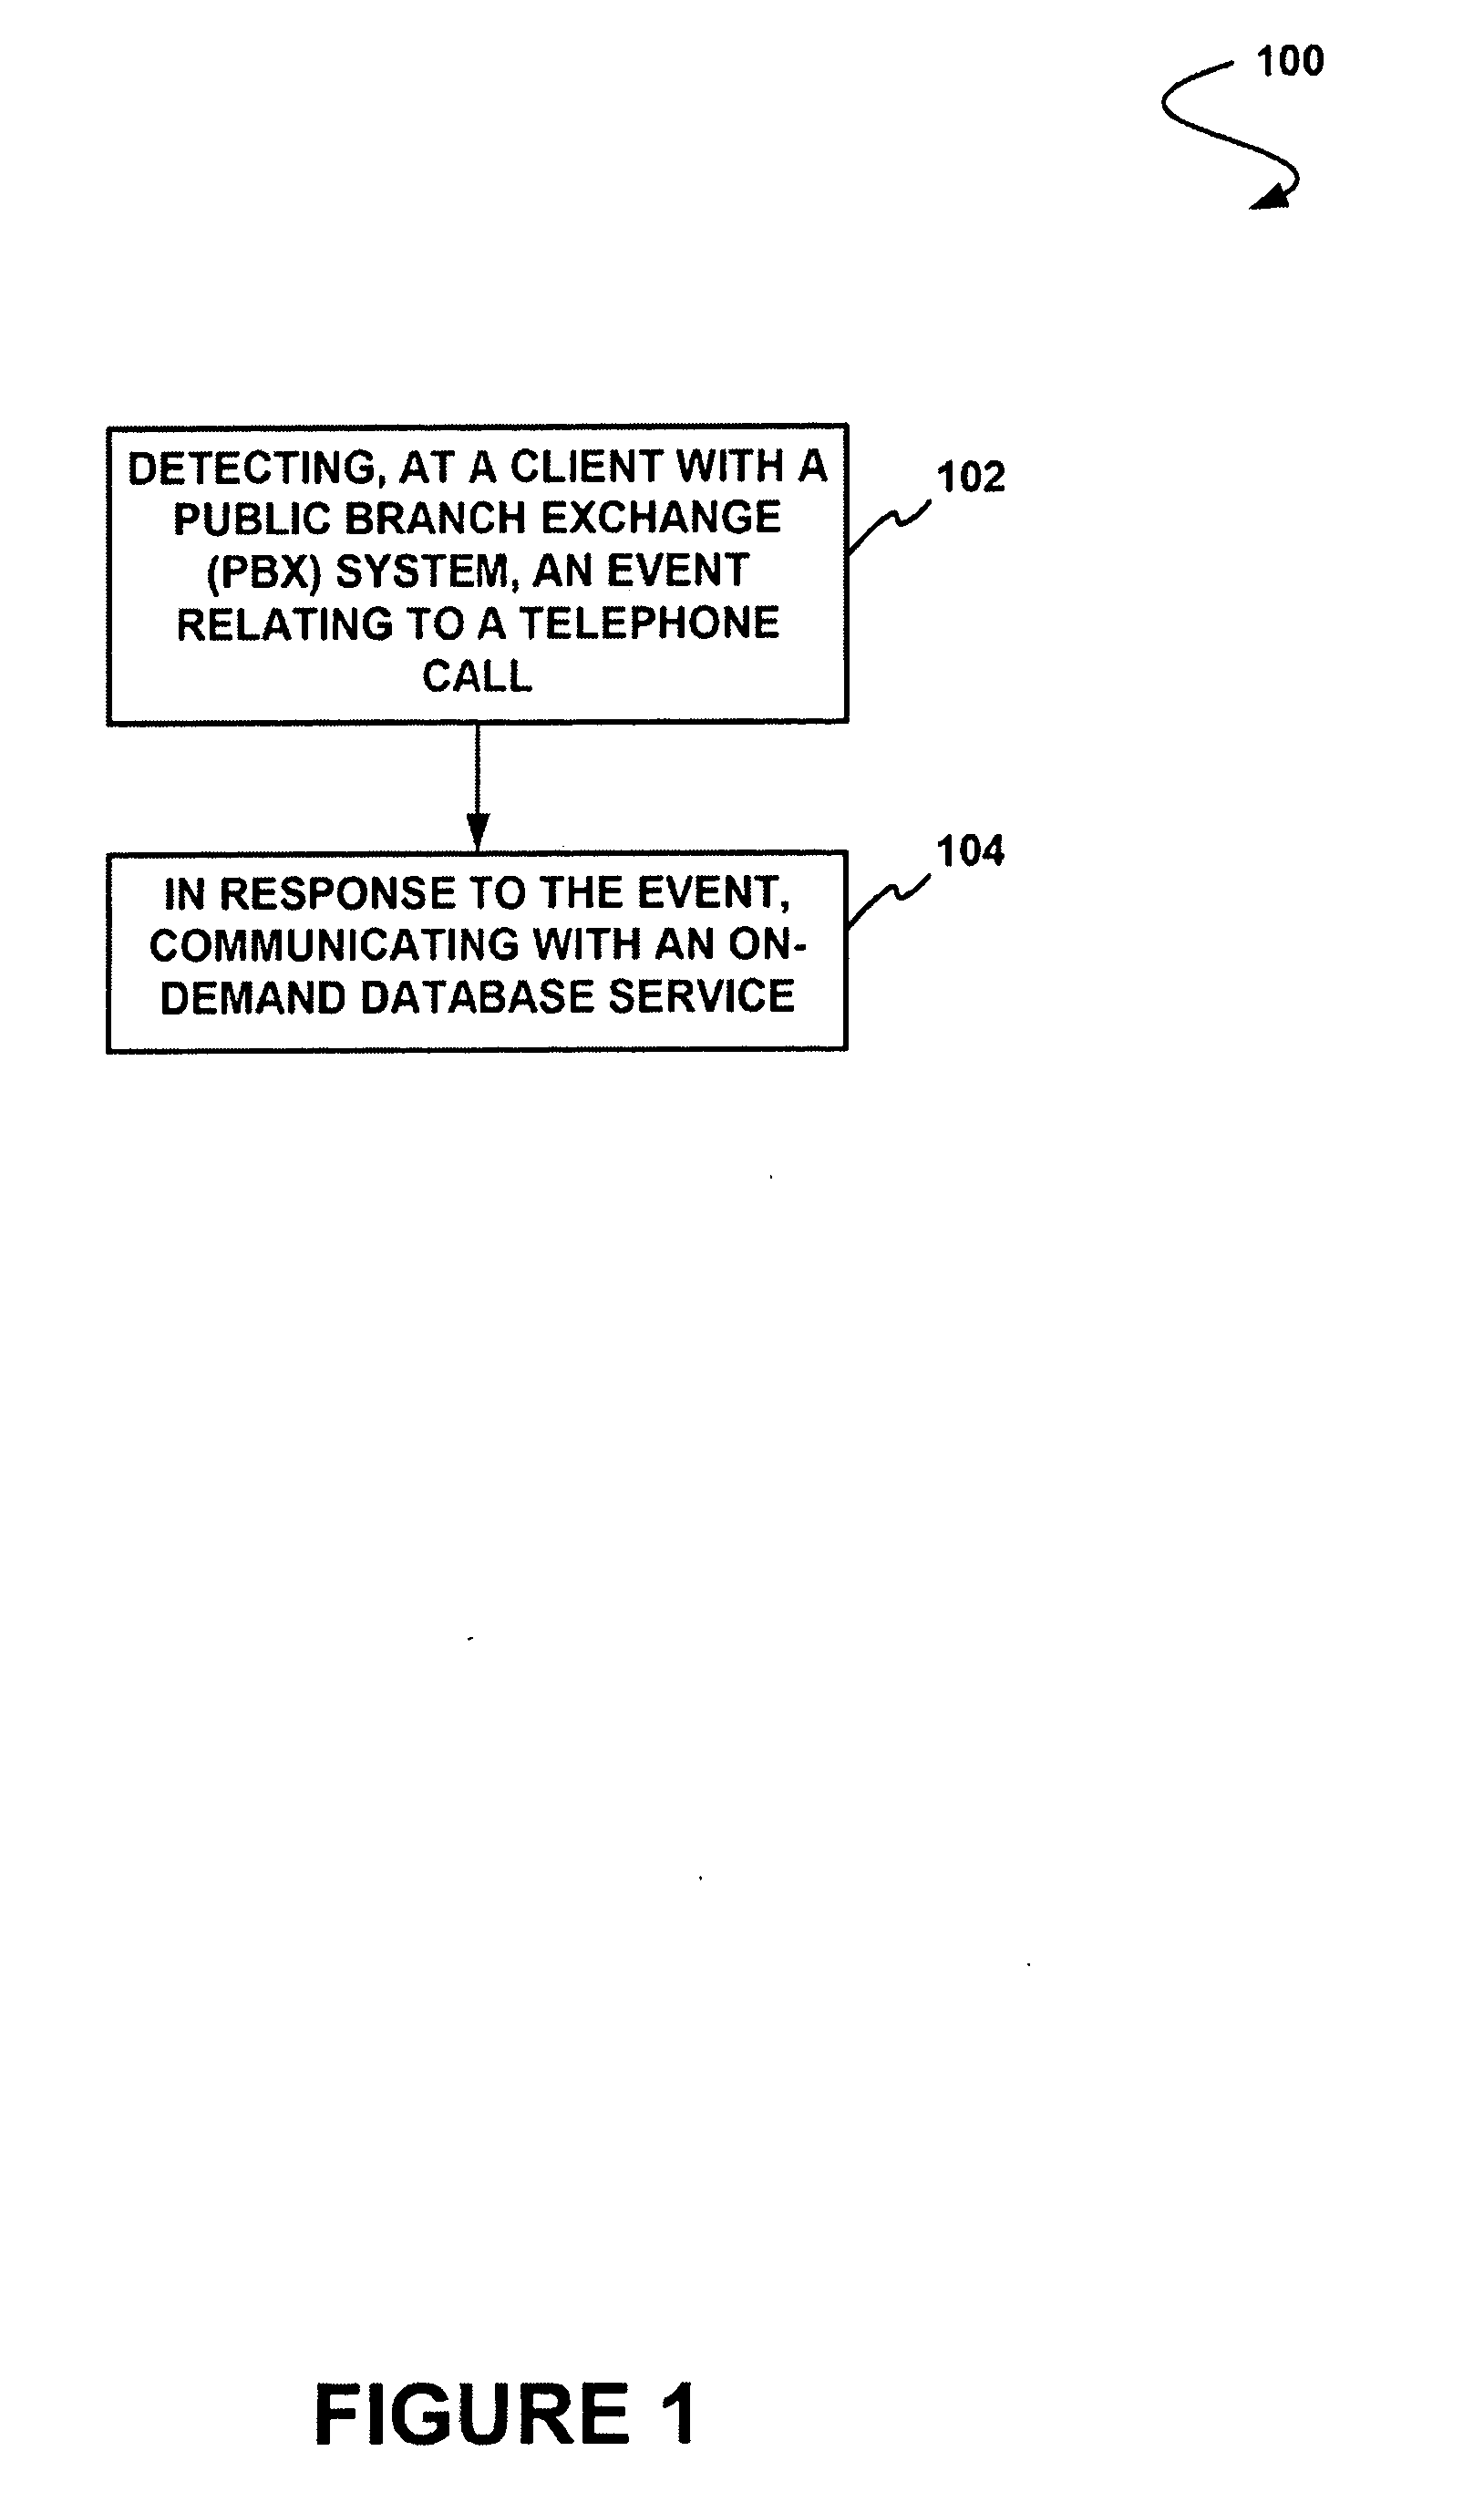 Method and system for integrating a pbx-equipped client and an on-demand database service